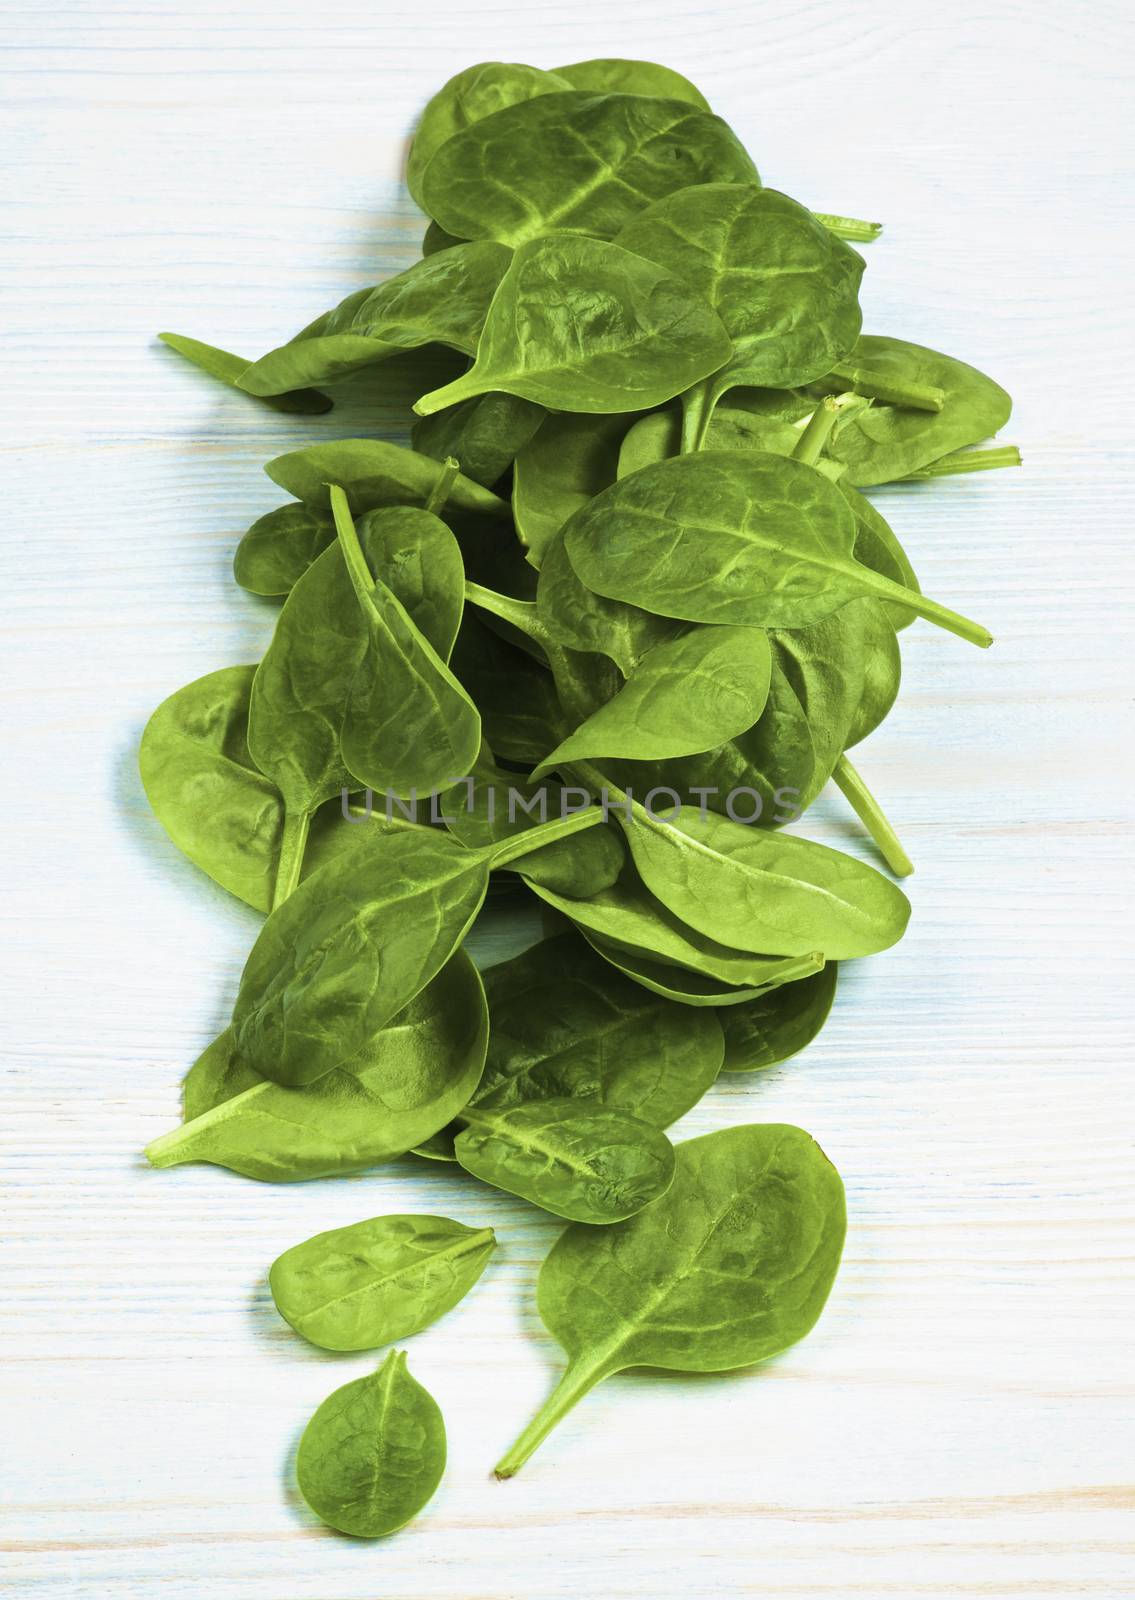 Small Raw Spinach Leafs In a Row closeup on Light Blue Wooden background